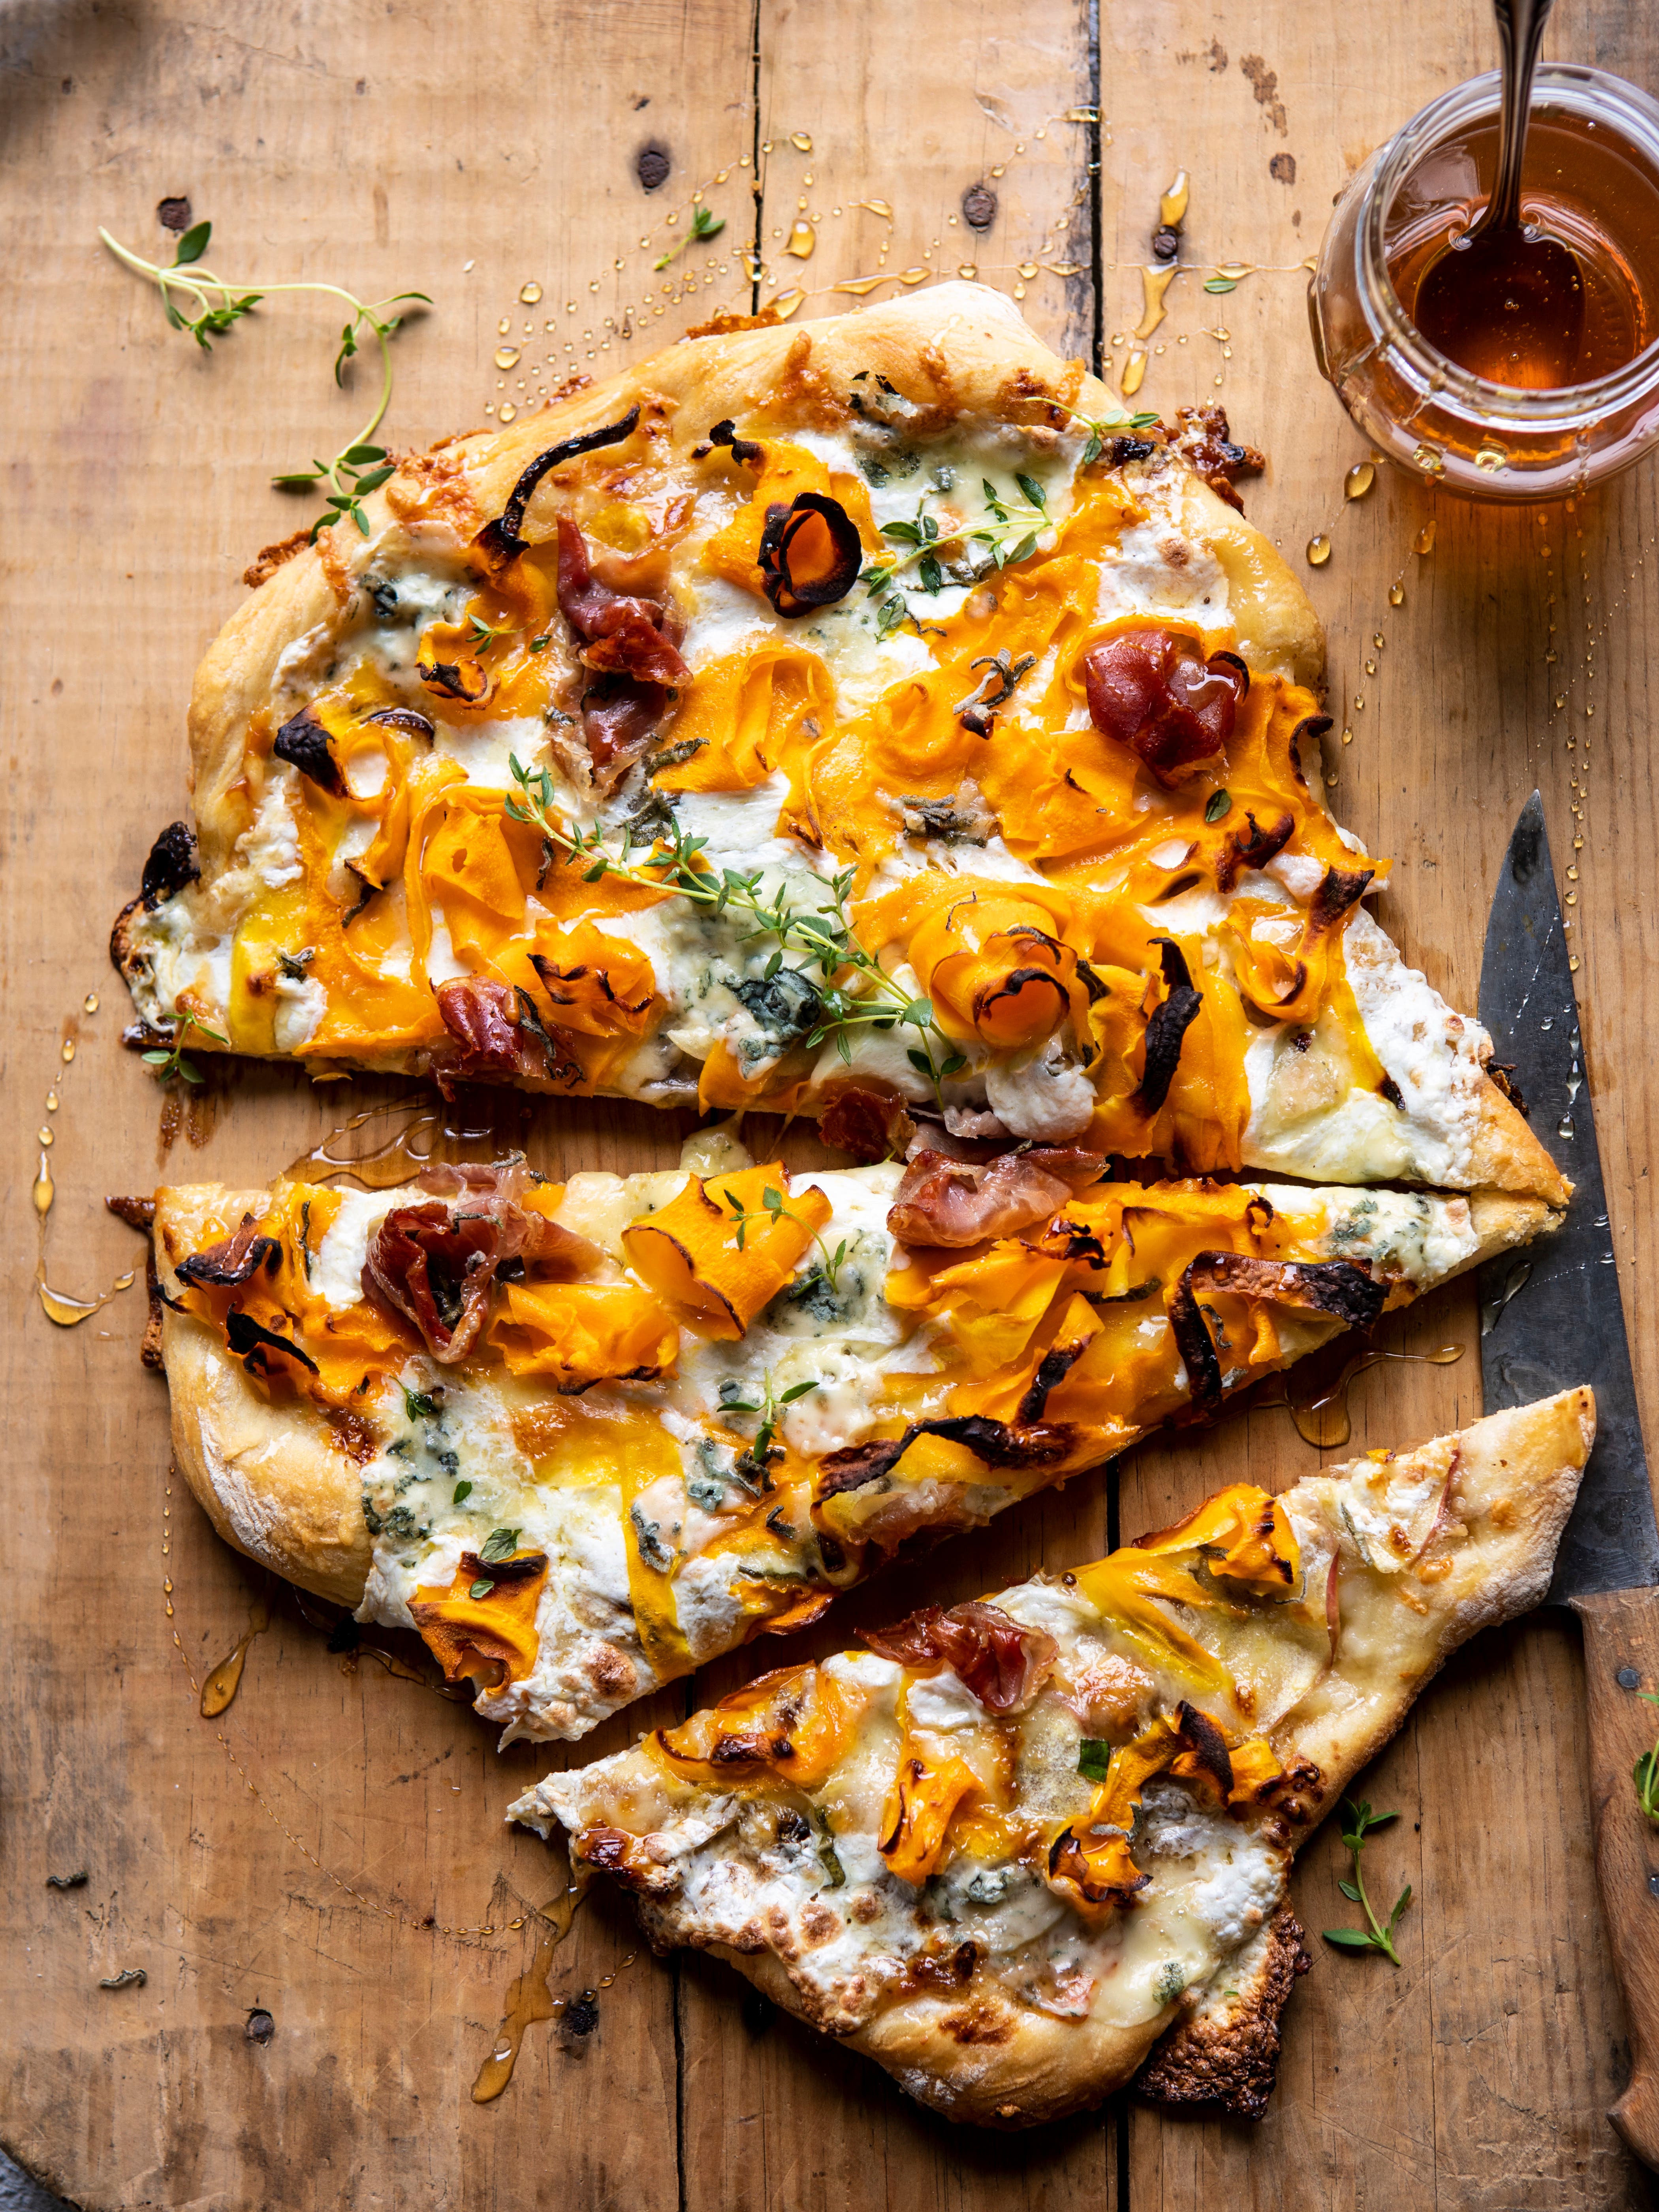 If You Have 30 Minutes, You Can Make This Butternut Squash Pizza